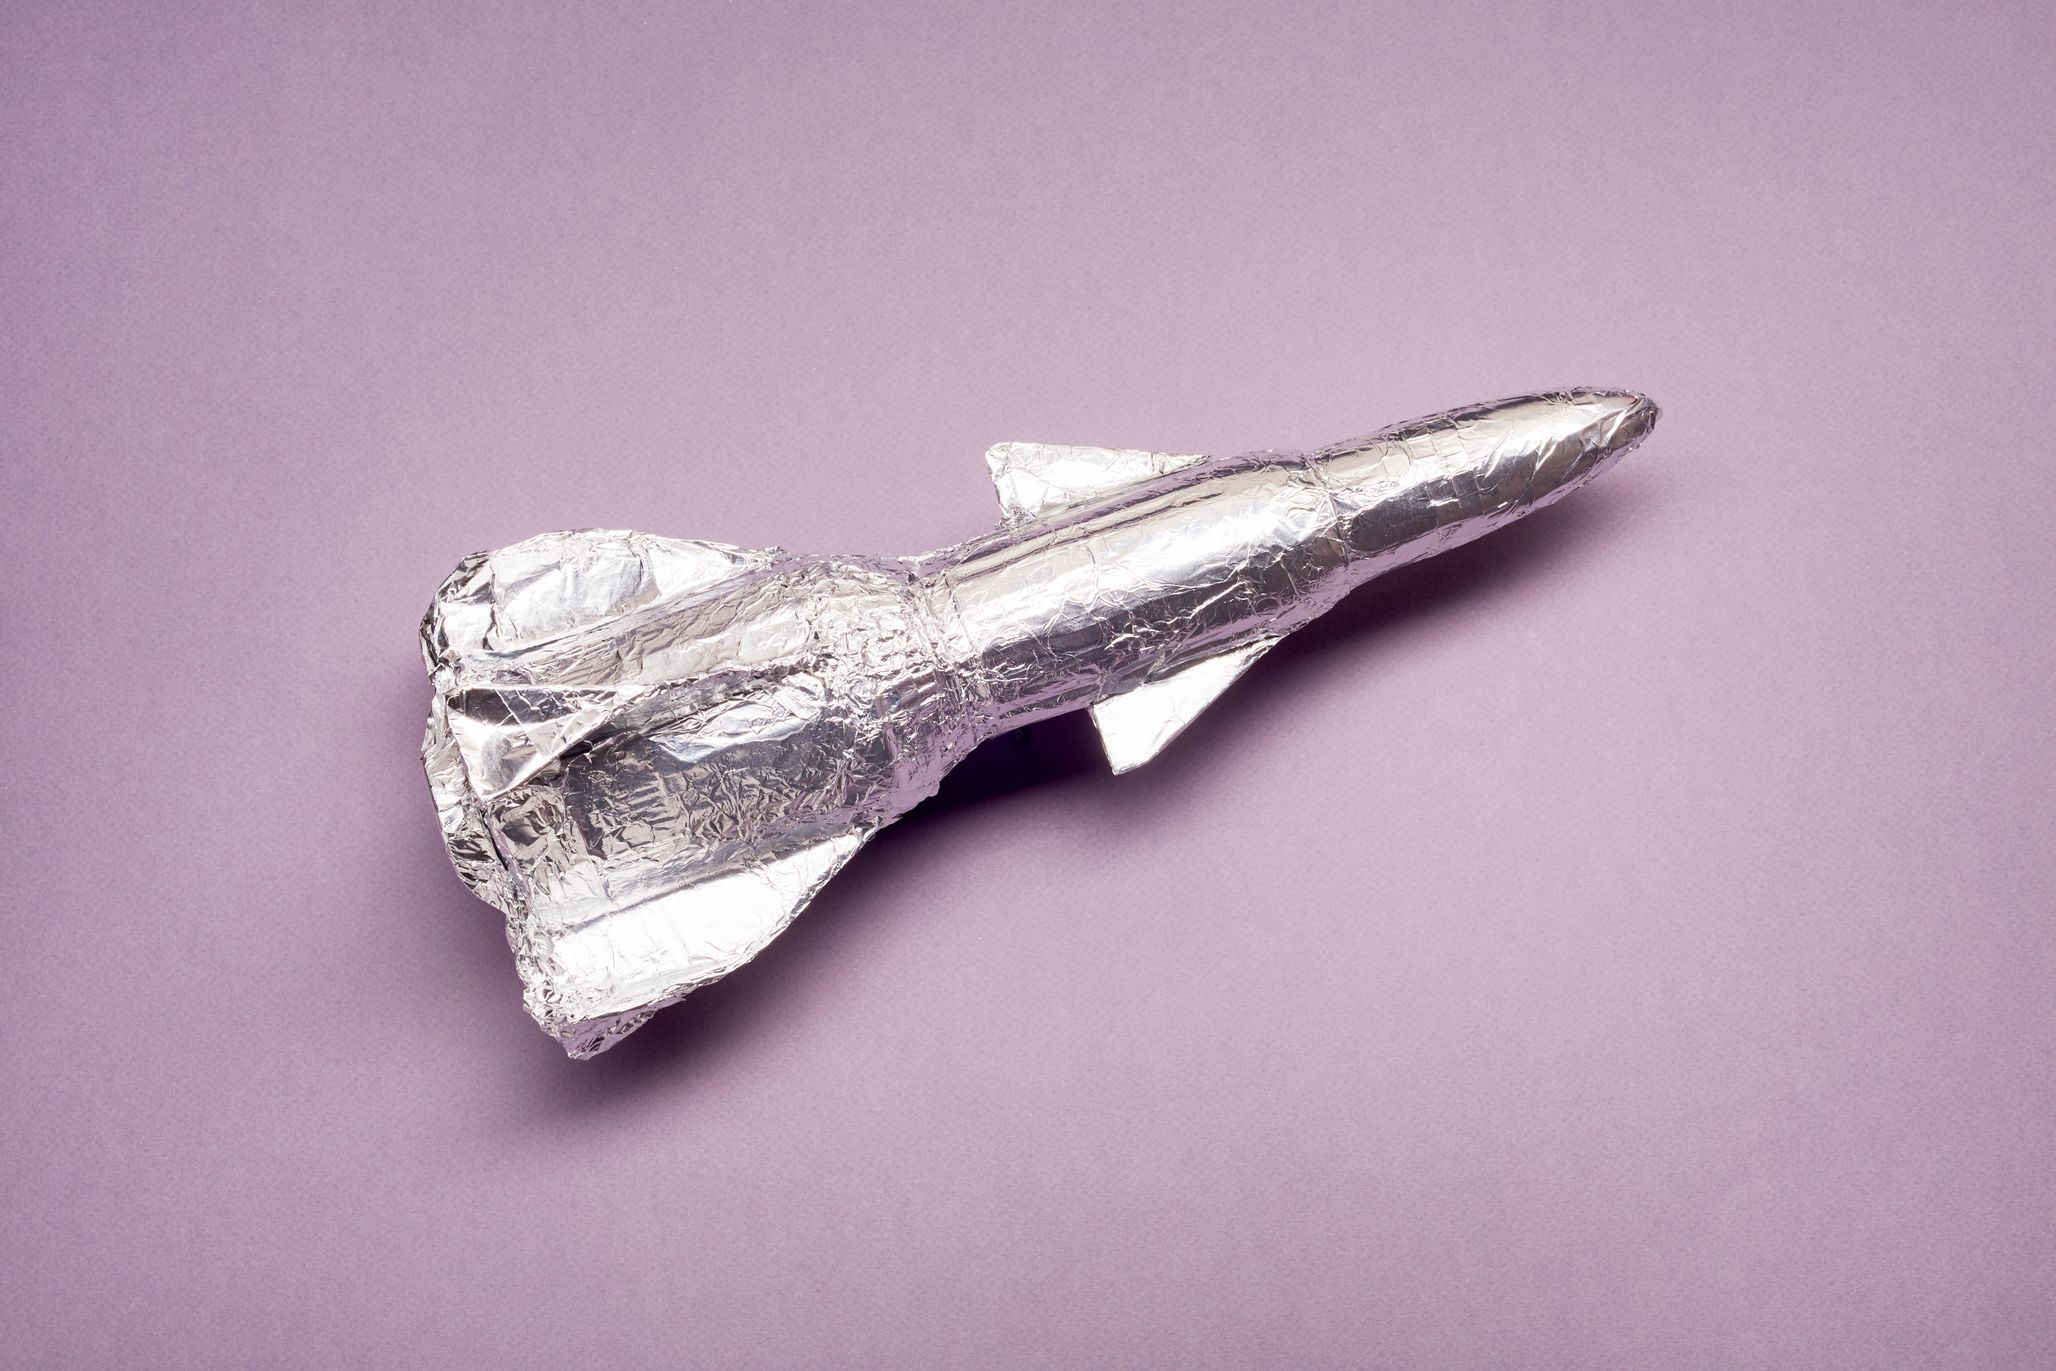 Rocketship self-made out of tinfoil, against a purple background